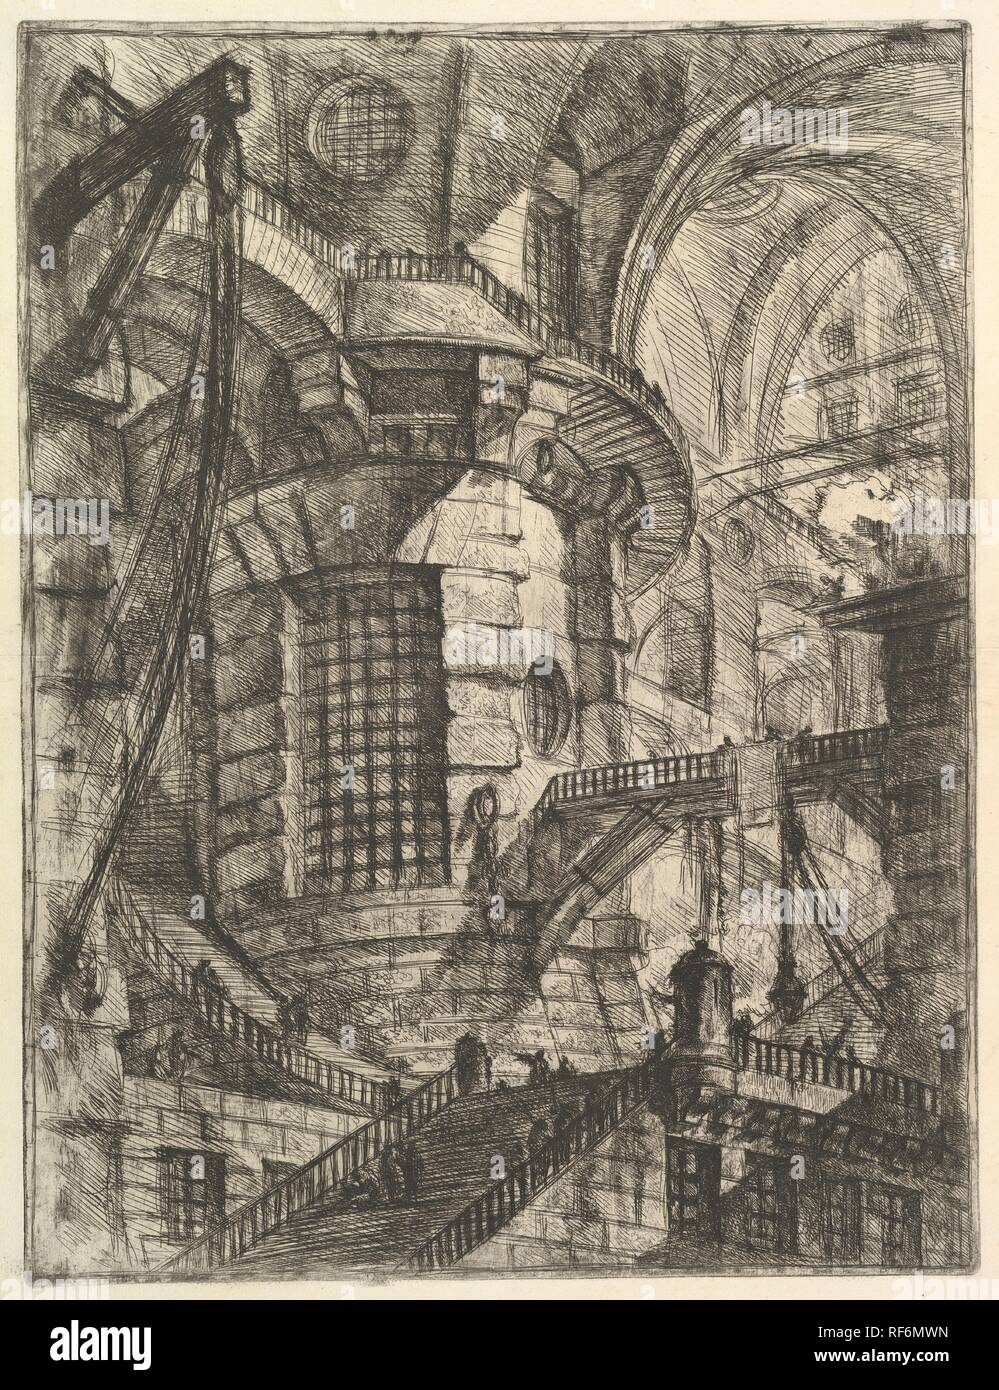 The Round Tower, from 'Carceri d'invenzione' (Imaginary Prisons). Artist: Giovanni Battista Piranesi (Italian, Mogliano Veneto 1720-1778 Rome). Dimensions: Sheet: 24 13/16 x 19 1/2 in. (63 x 49.5 cm)  Plate: 21 7/16 x 16 5/16 in. (54.5 x 41.5 cm). Publisher: Giovanni Bouchard (French, ca. 1716-1795). Date: ca. 1749-50.  A native of Venice, Piranesi went to Rome at age twenty and where he remained for the remainder of his life. Rome was the inspiration for and subject of most of his etchings that number over a thousand. Piranesi studied architecture, engineering and stage design, and his first  Stock Photo